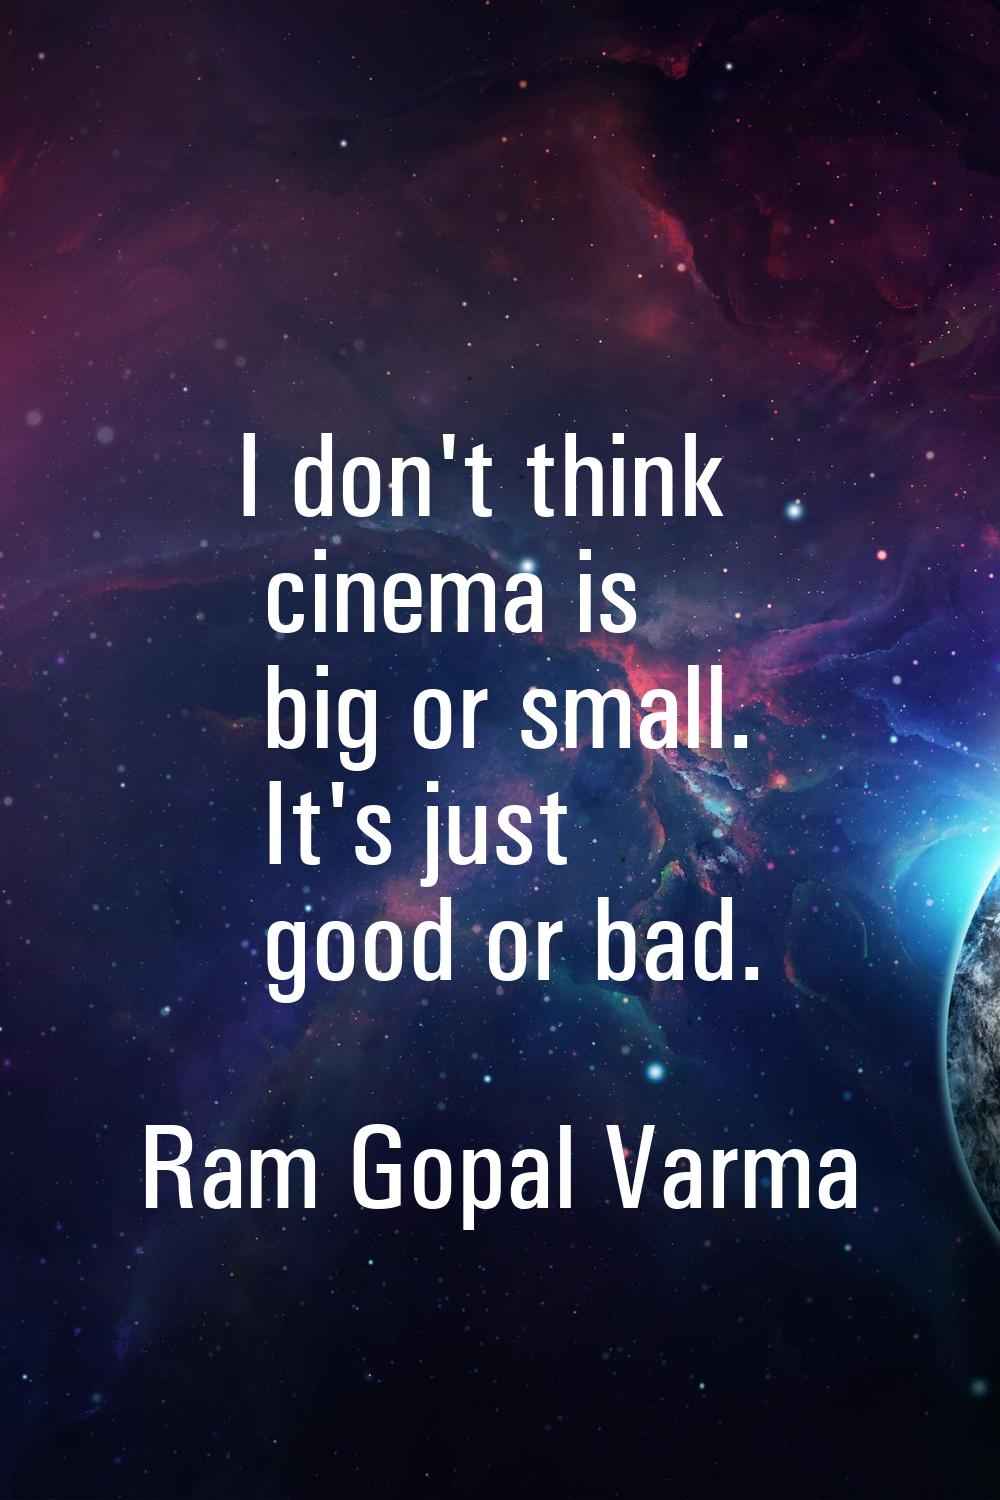 I don't think cinema is big or small. It's just good or bad.